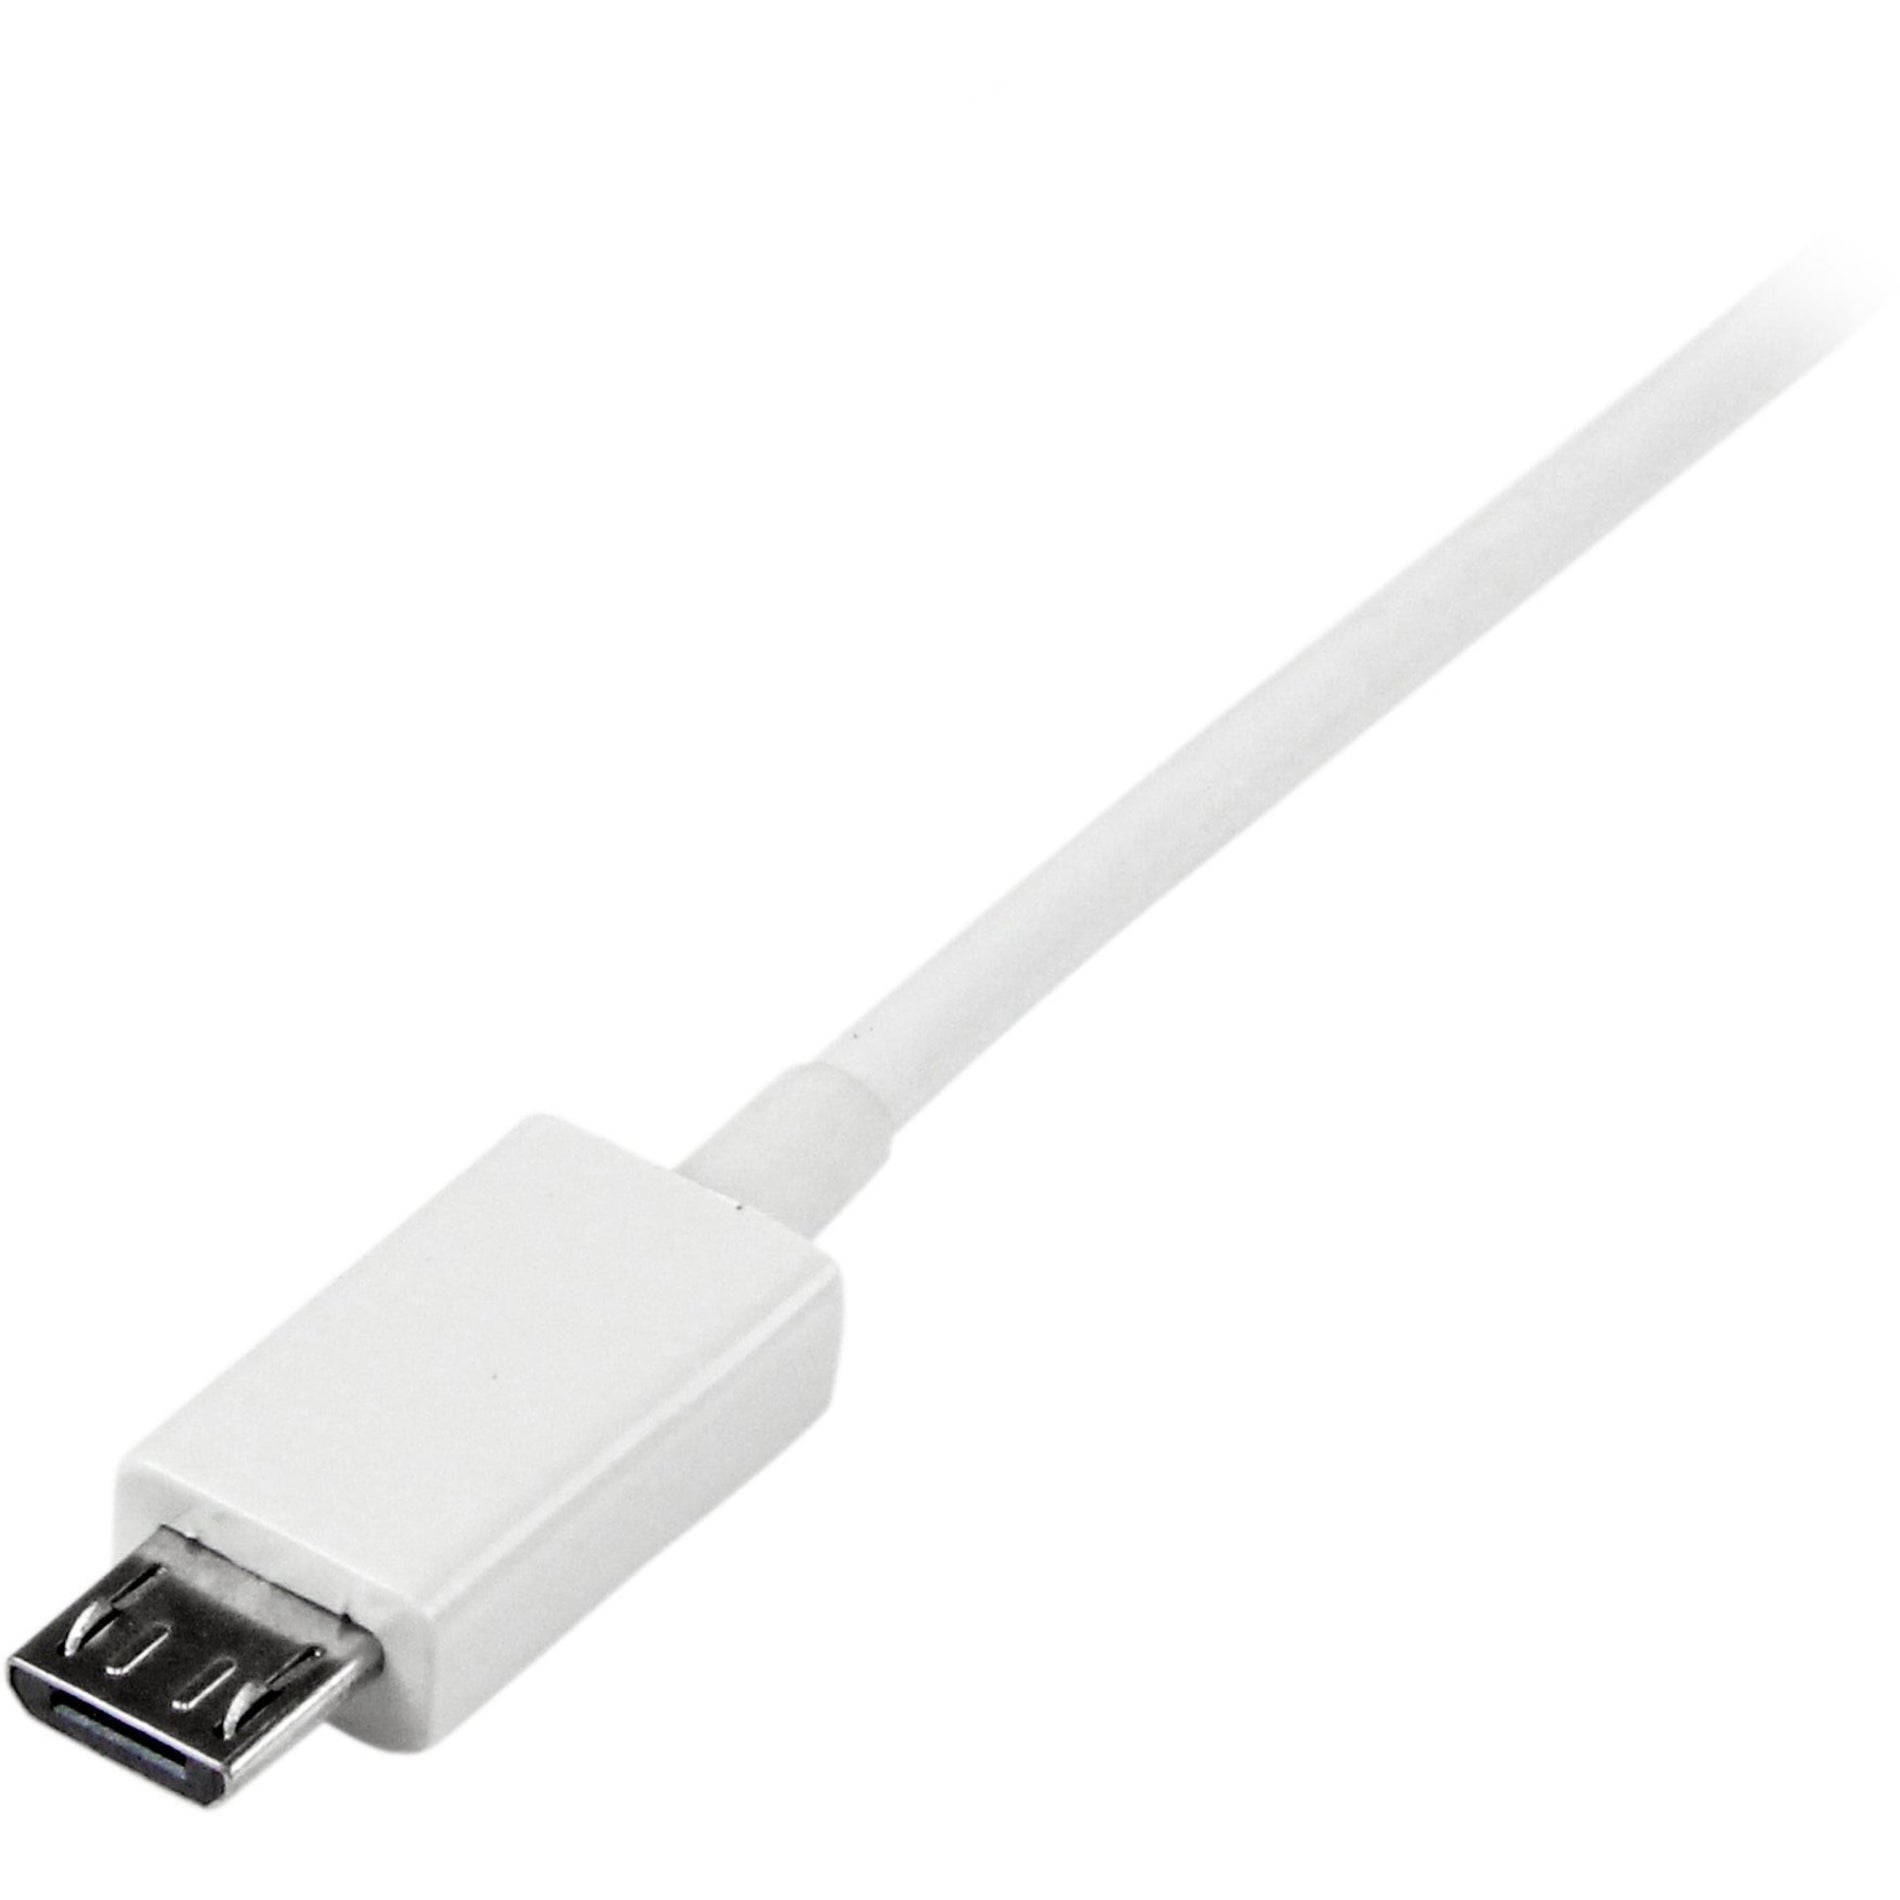 StarTech.com USBPAUB1MW 1m White Micro USB Cable - A to Micro B, Data Transfer Cable, 3.28 ft, Strain Relief, Molded, Shielding, Copper Conductor, USB 2.0 Type A - Male to Micro USB 2.0 Type B - Male, 480 Mbit/s